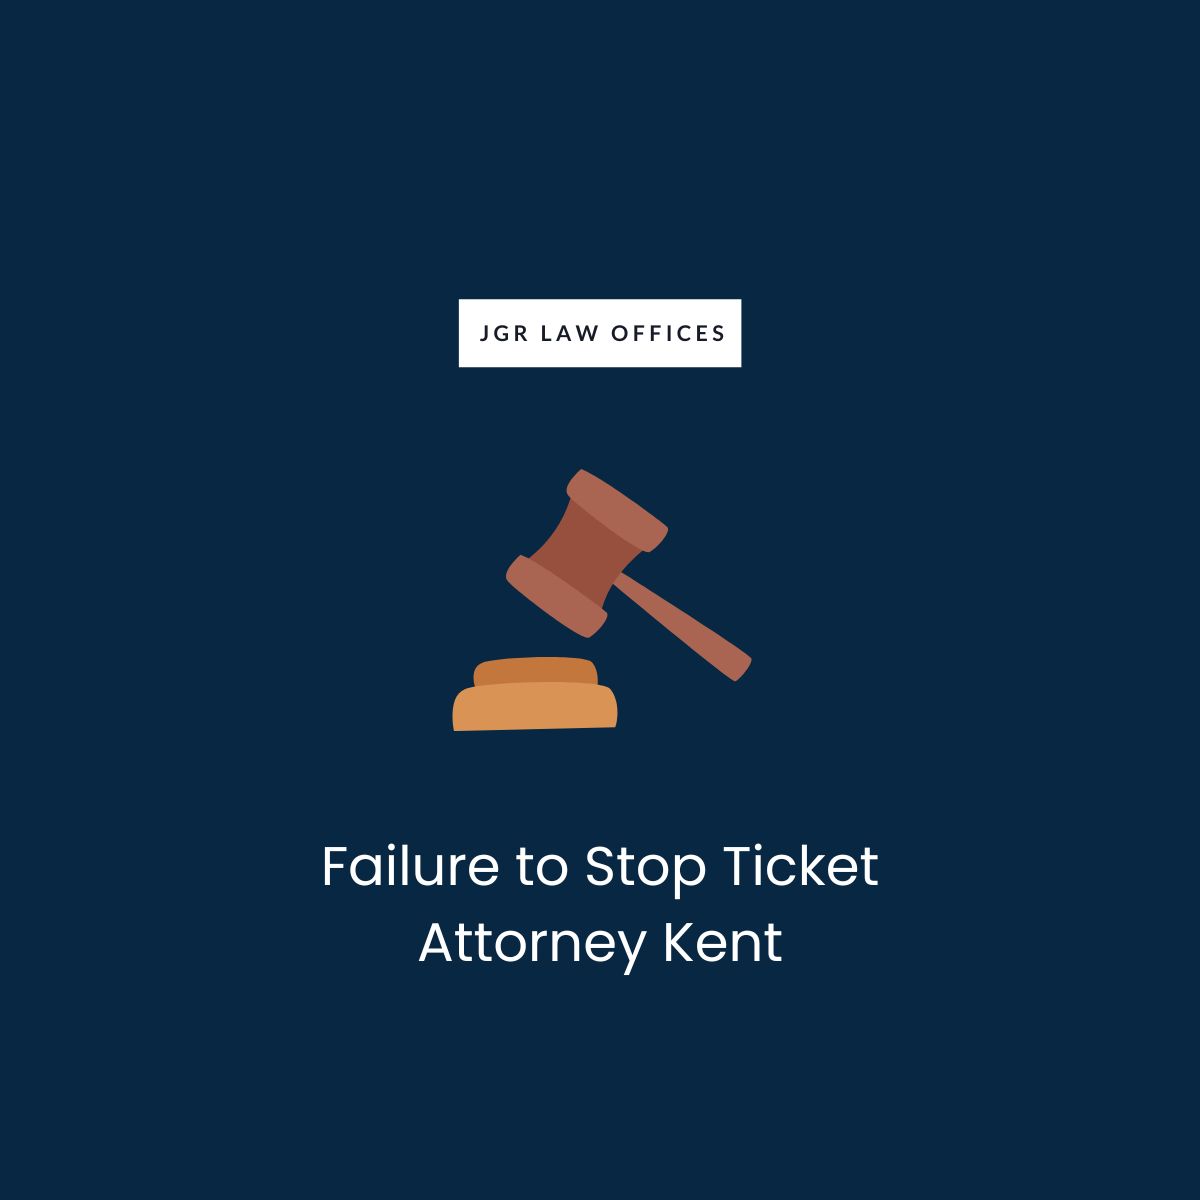 Failure to Stop Ticket Attorney Kent